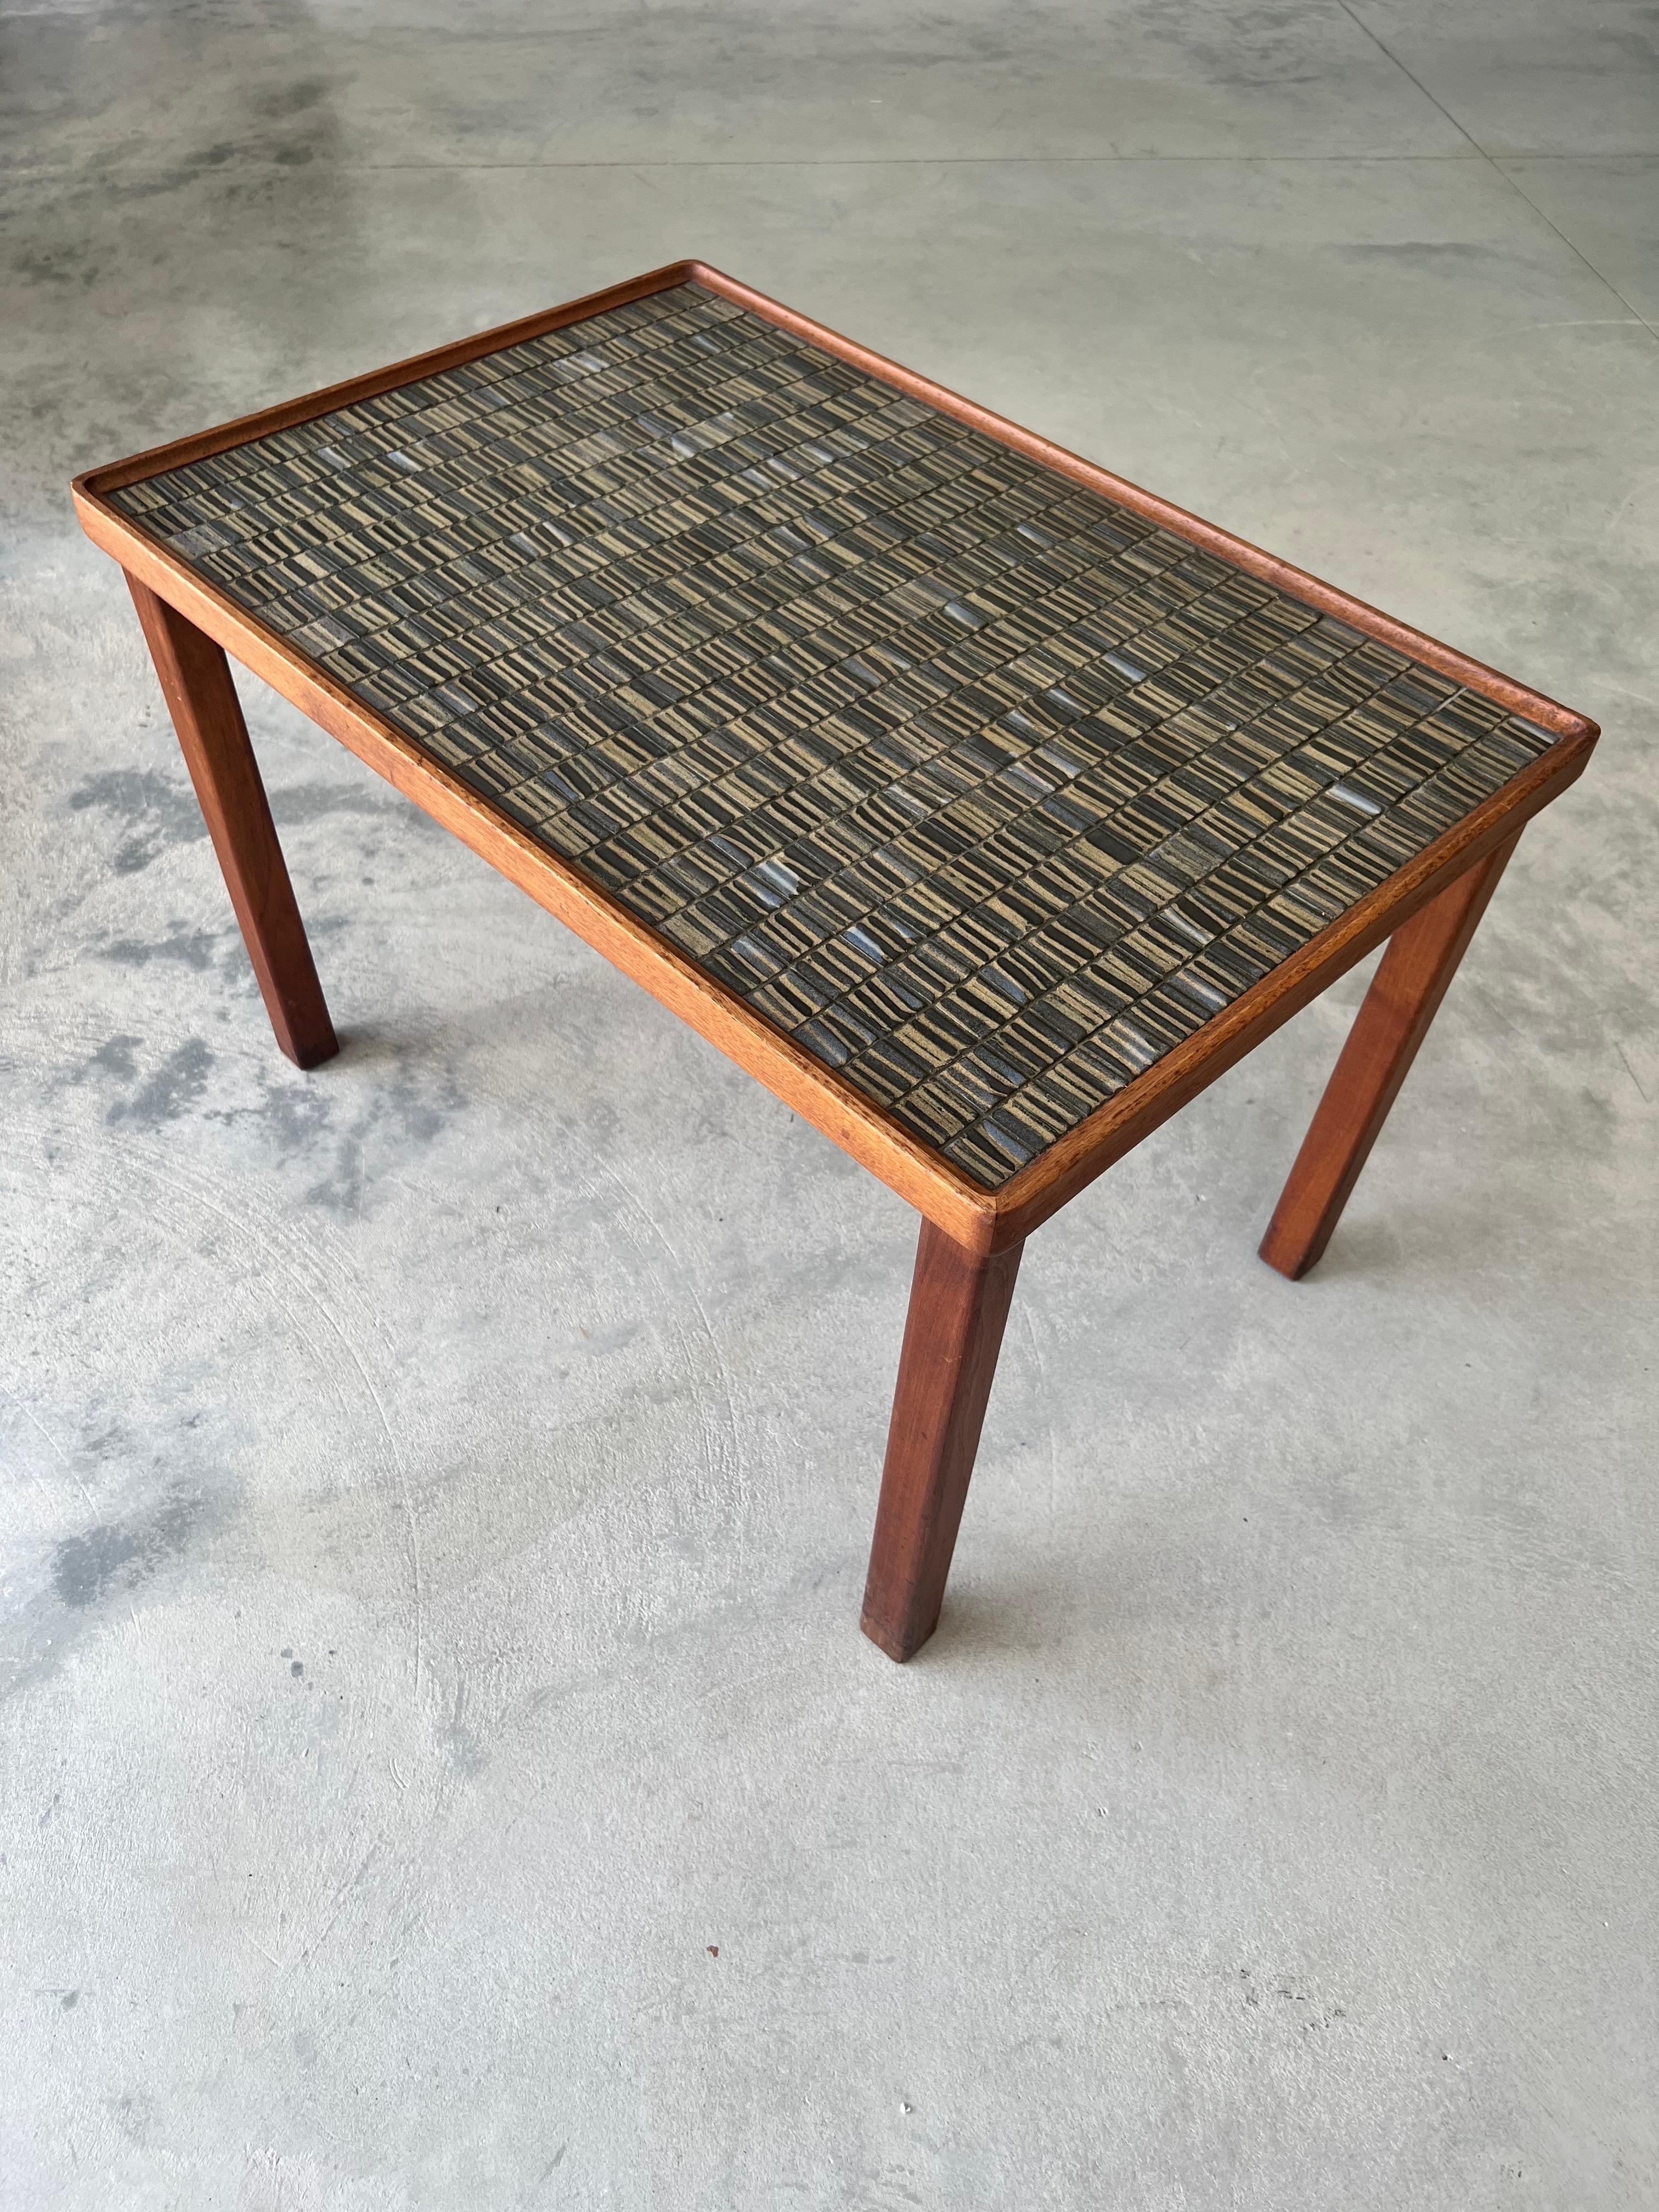 Jane and Gordon Martz Tile and Walnut Occasional Table 1